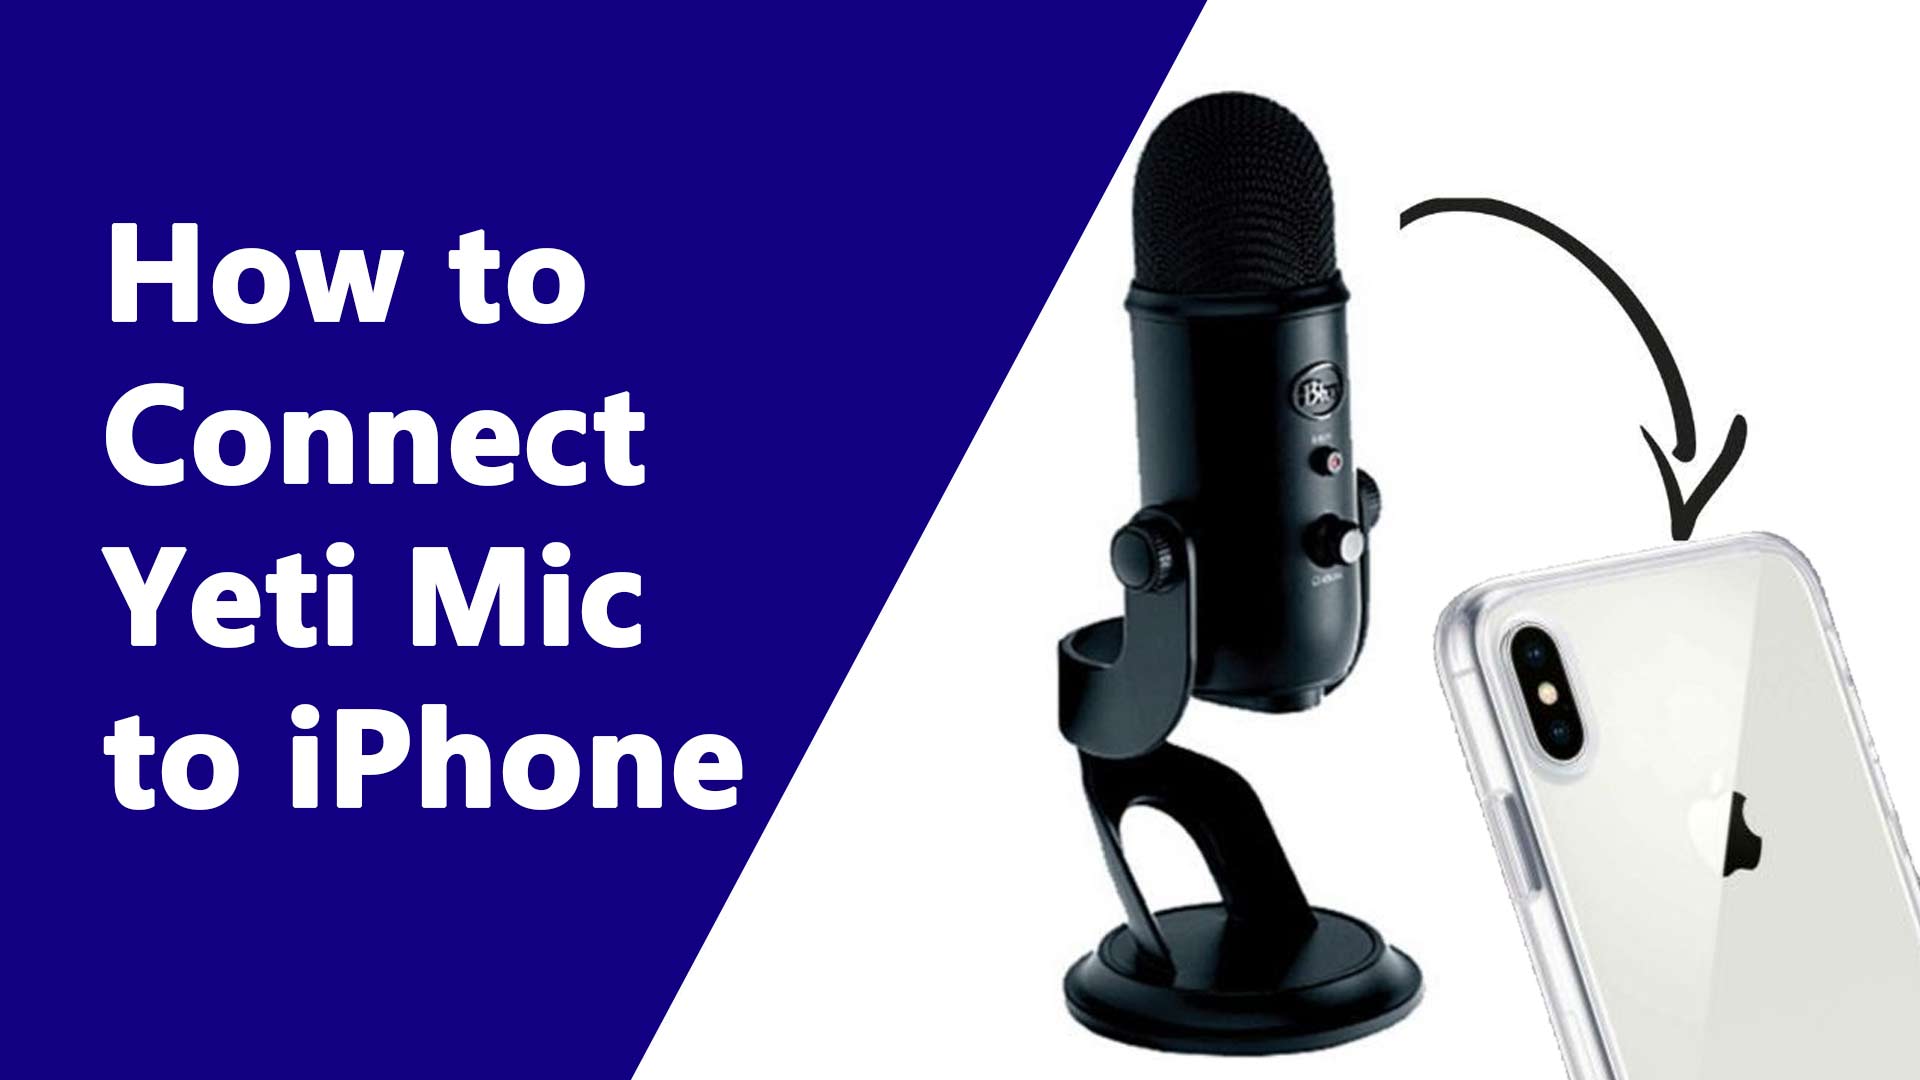 How to connect yeti mic to iPhone